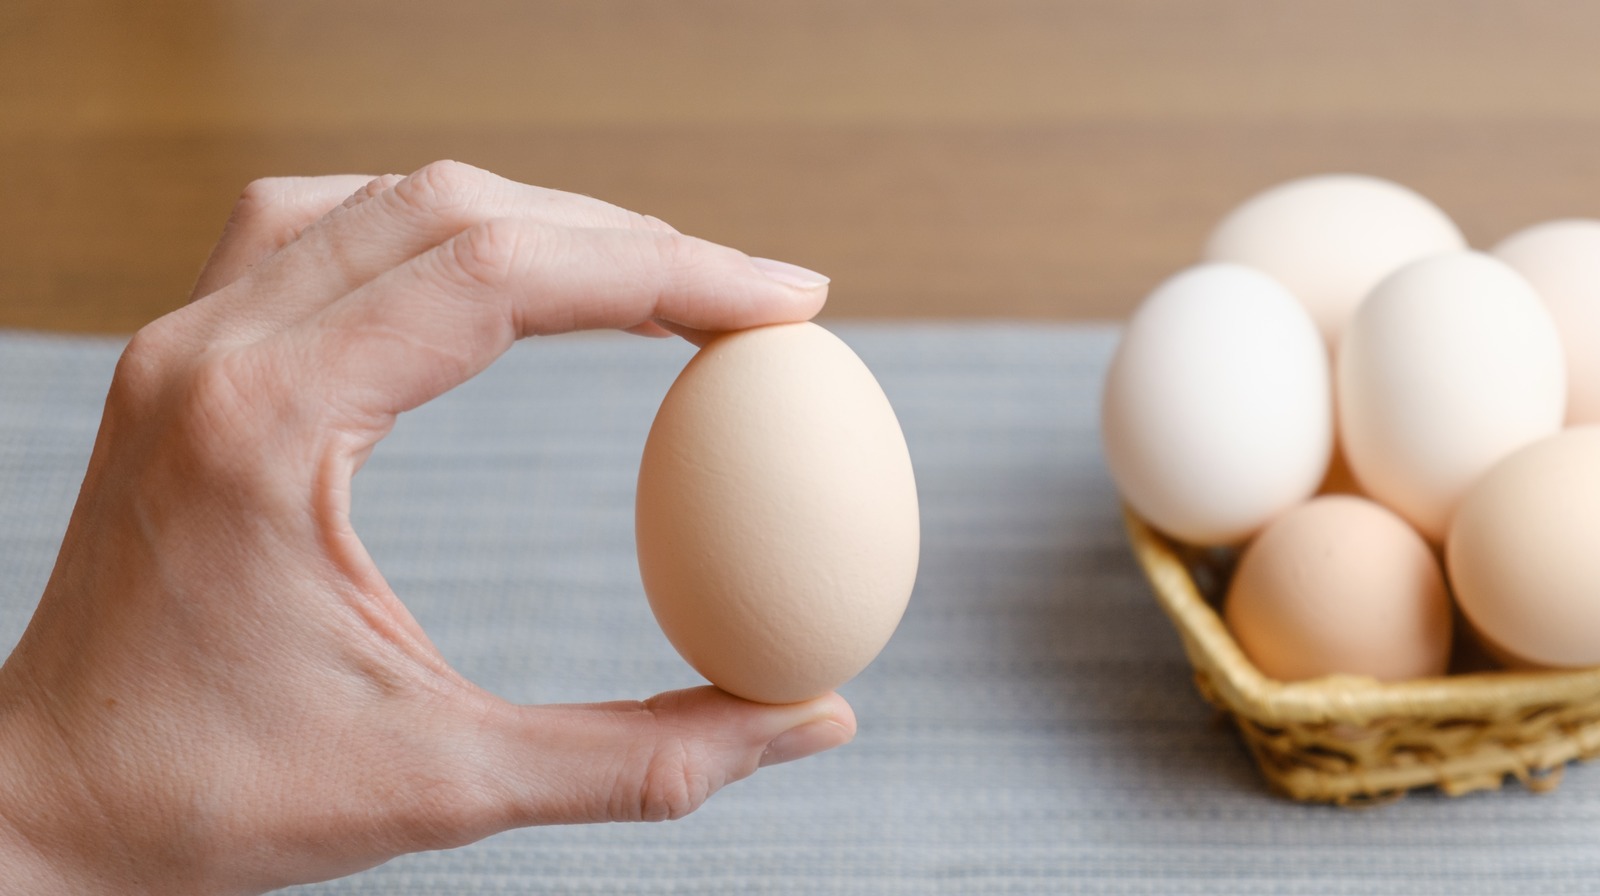 https://www.tastingtable.com/img/gallery/large-vs-extra-large-eggs-does-the-difference-really-matter/l-intro-1671583748.jpg